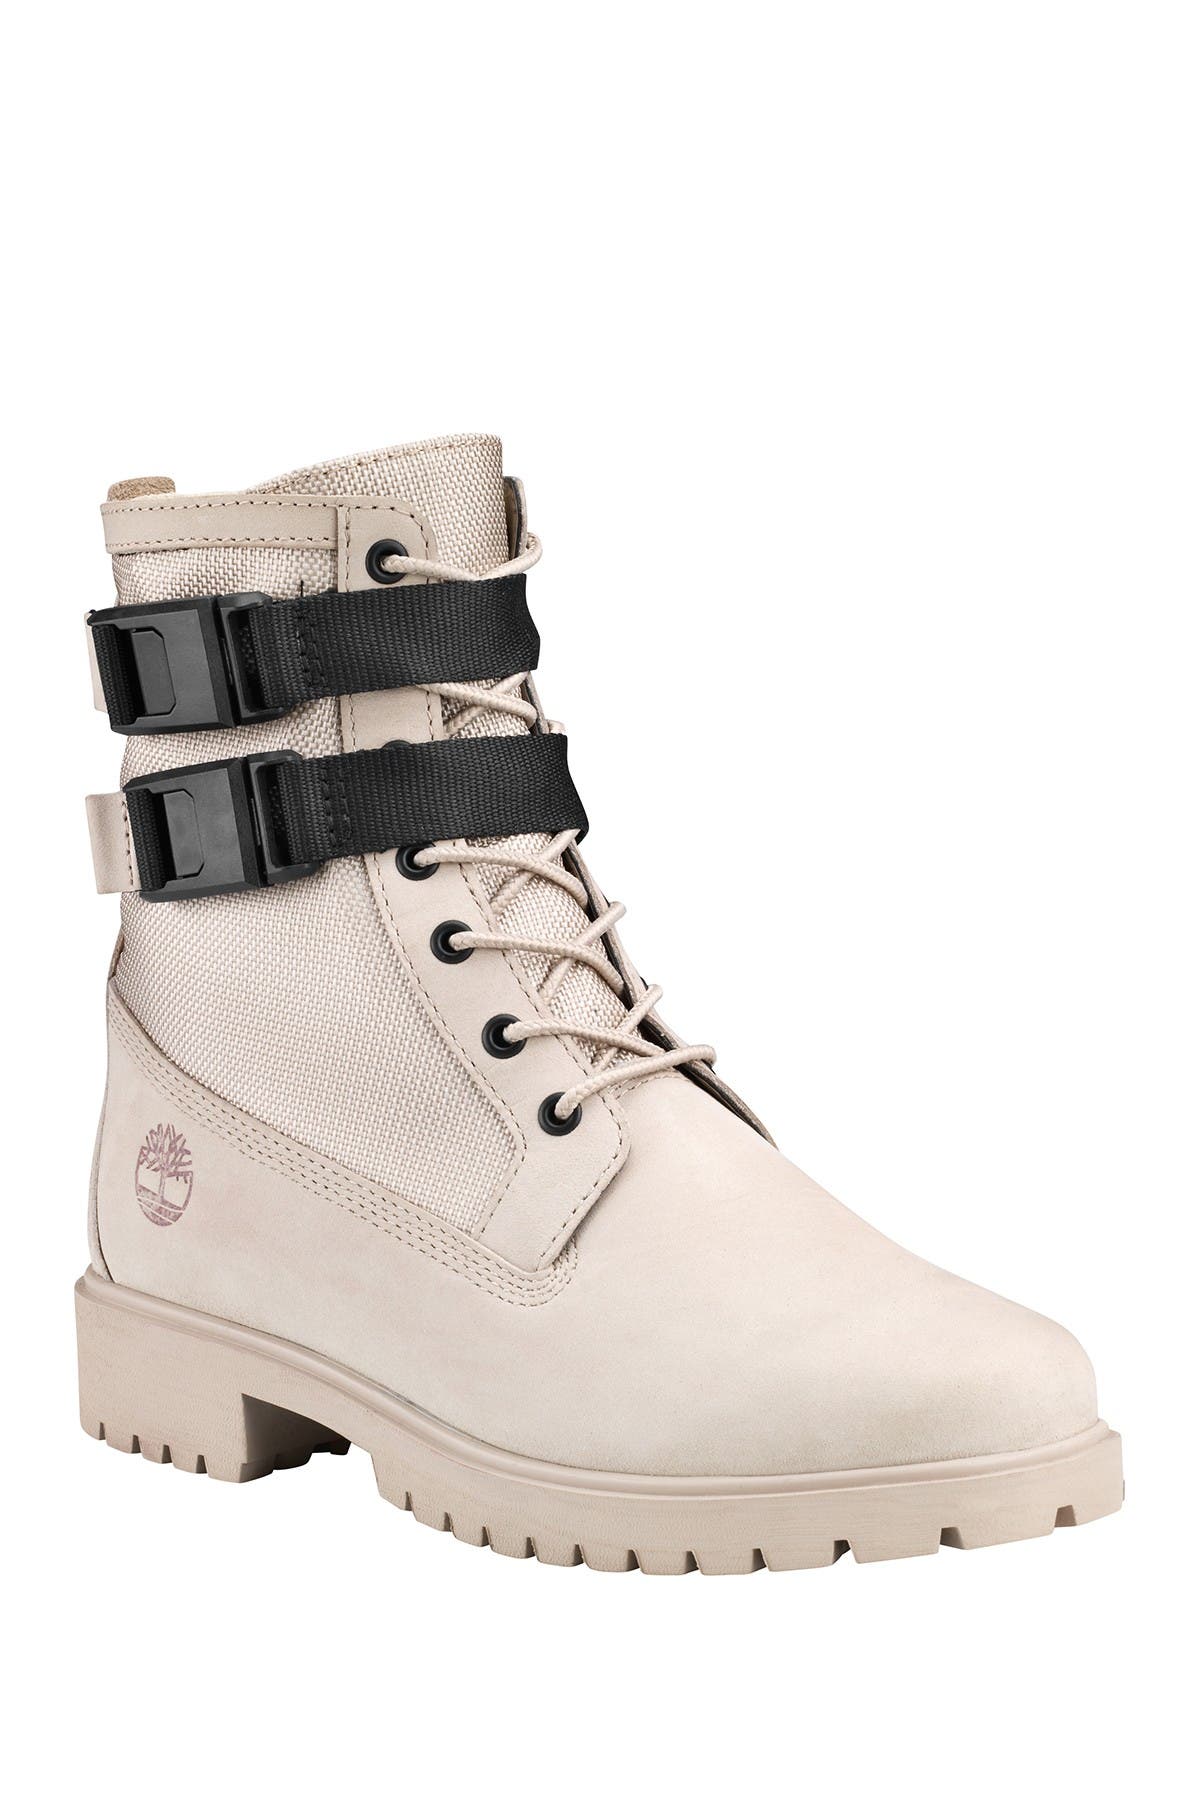 buckle timberland boots